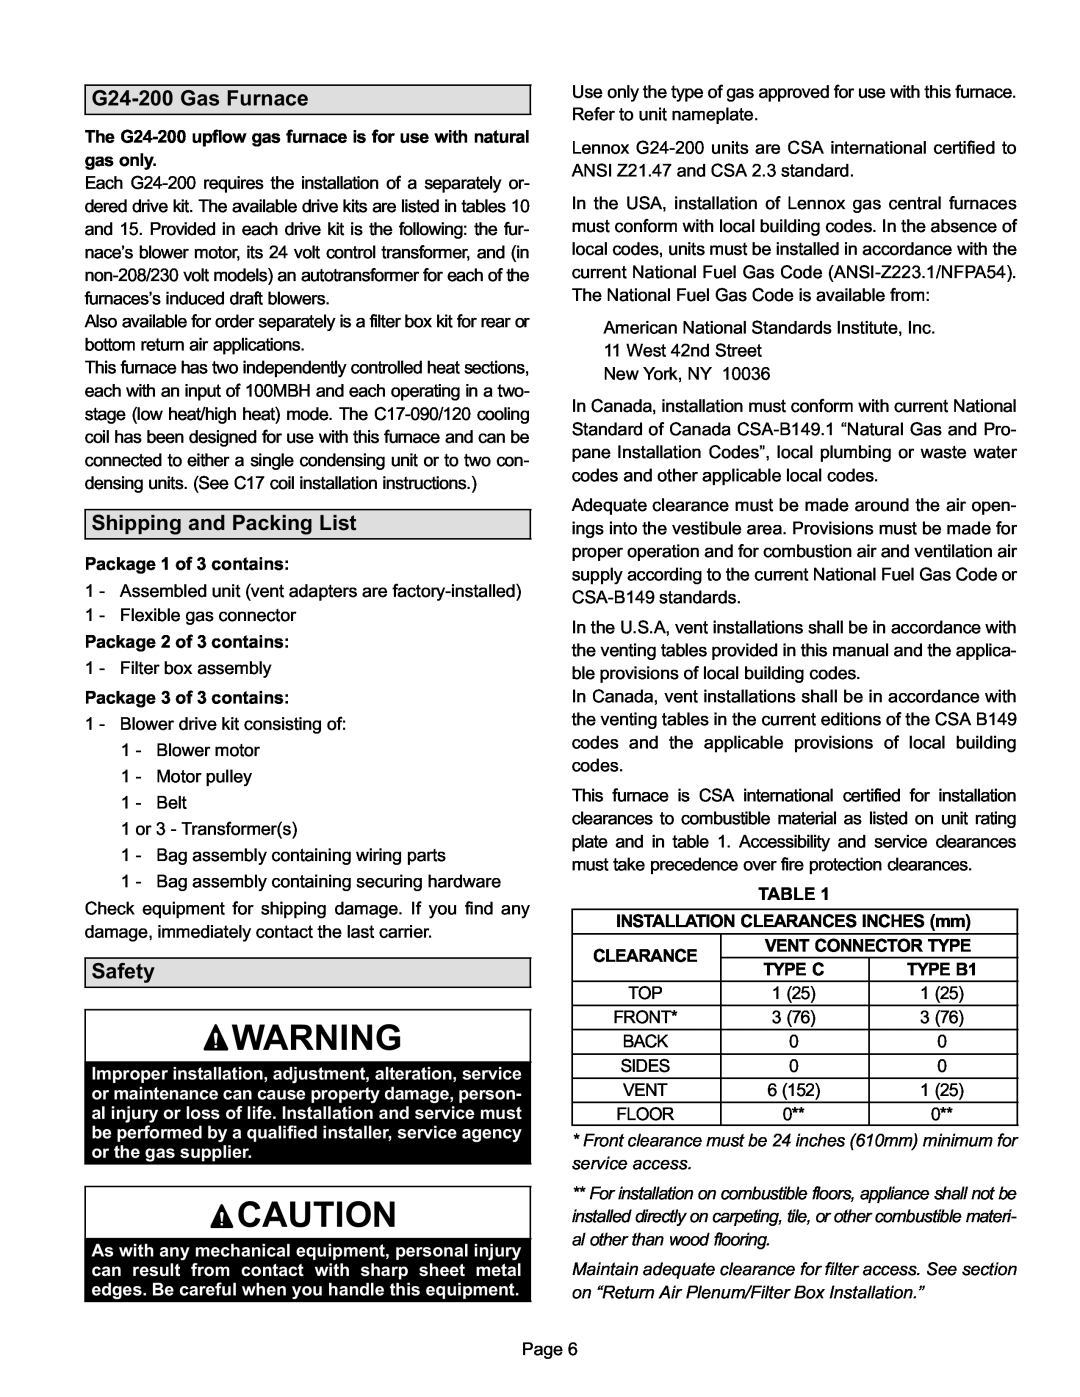 Lennox International Inc G24-200 installation instructions G24−200 Gas Furnace, Shipping and Packing List, Safety 